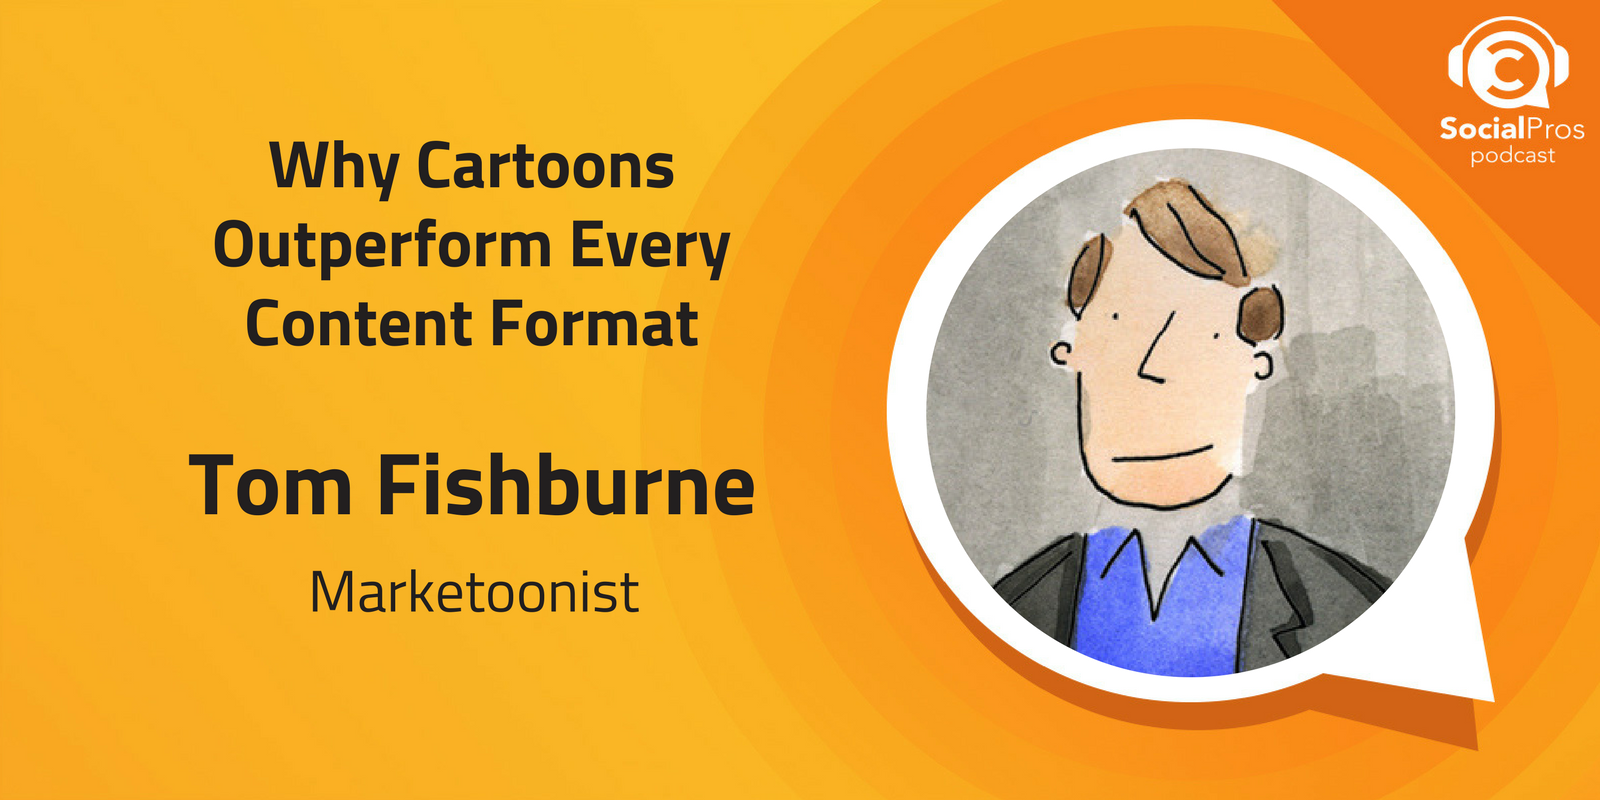 Why cartoons outperform every content format